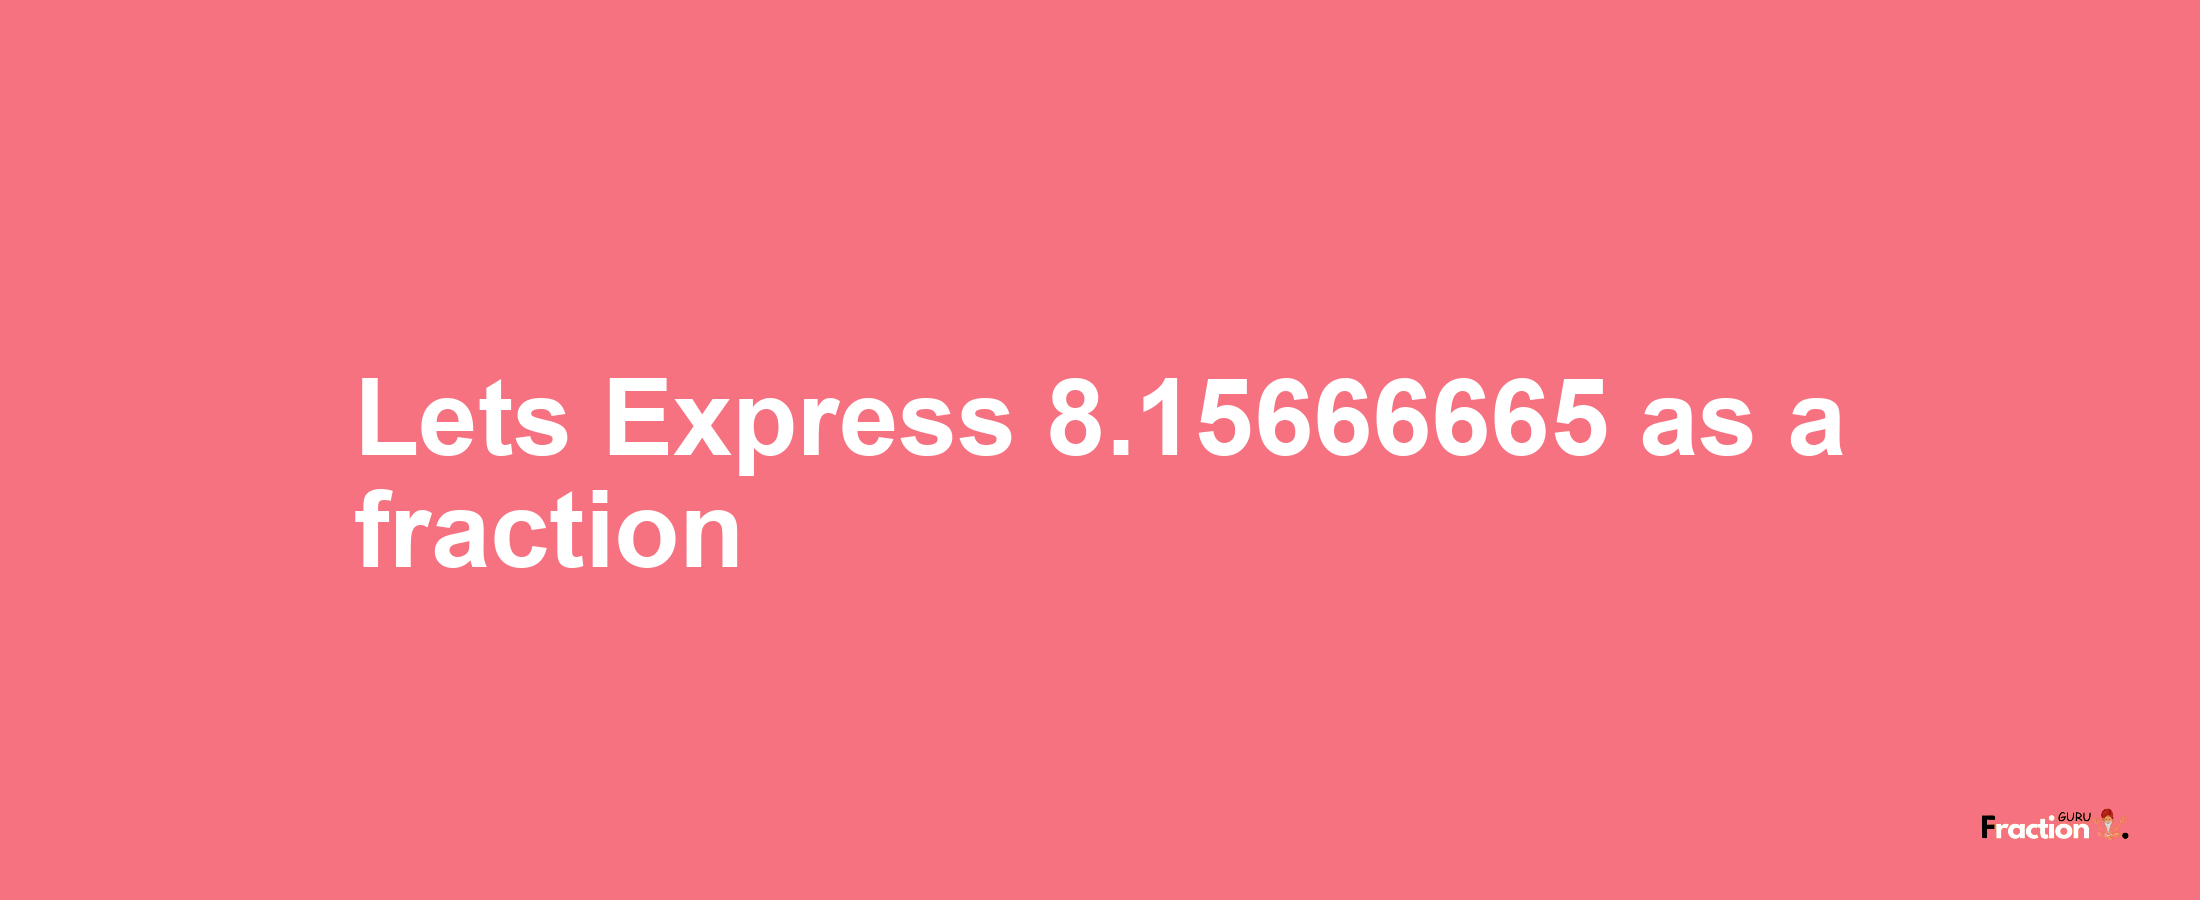 Lets Express 8.15666665 as afraction